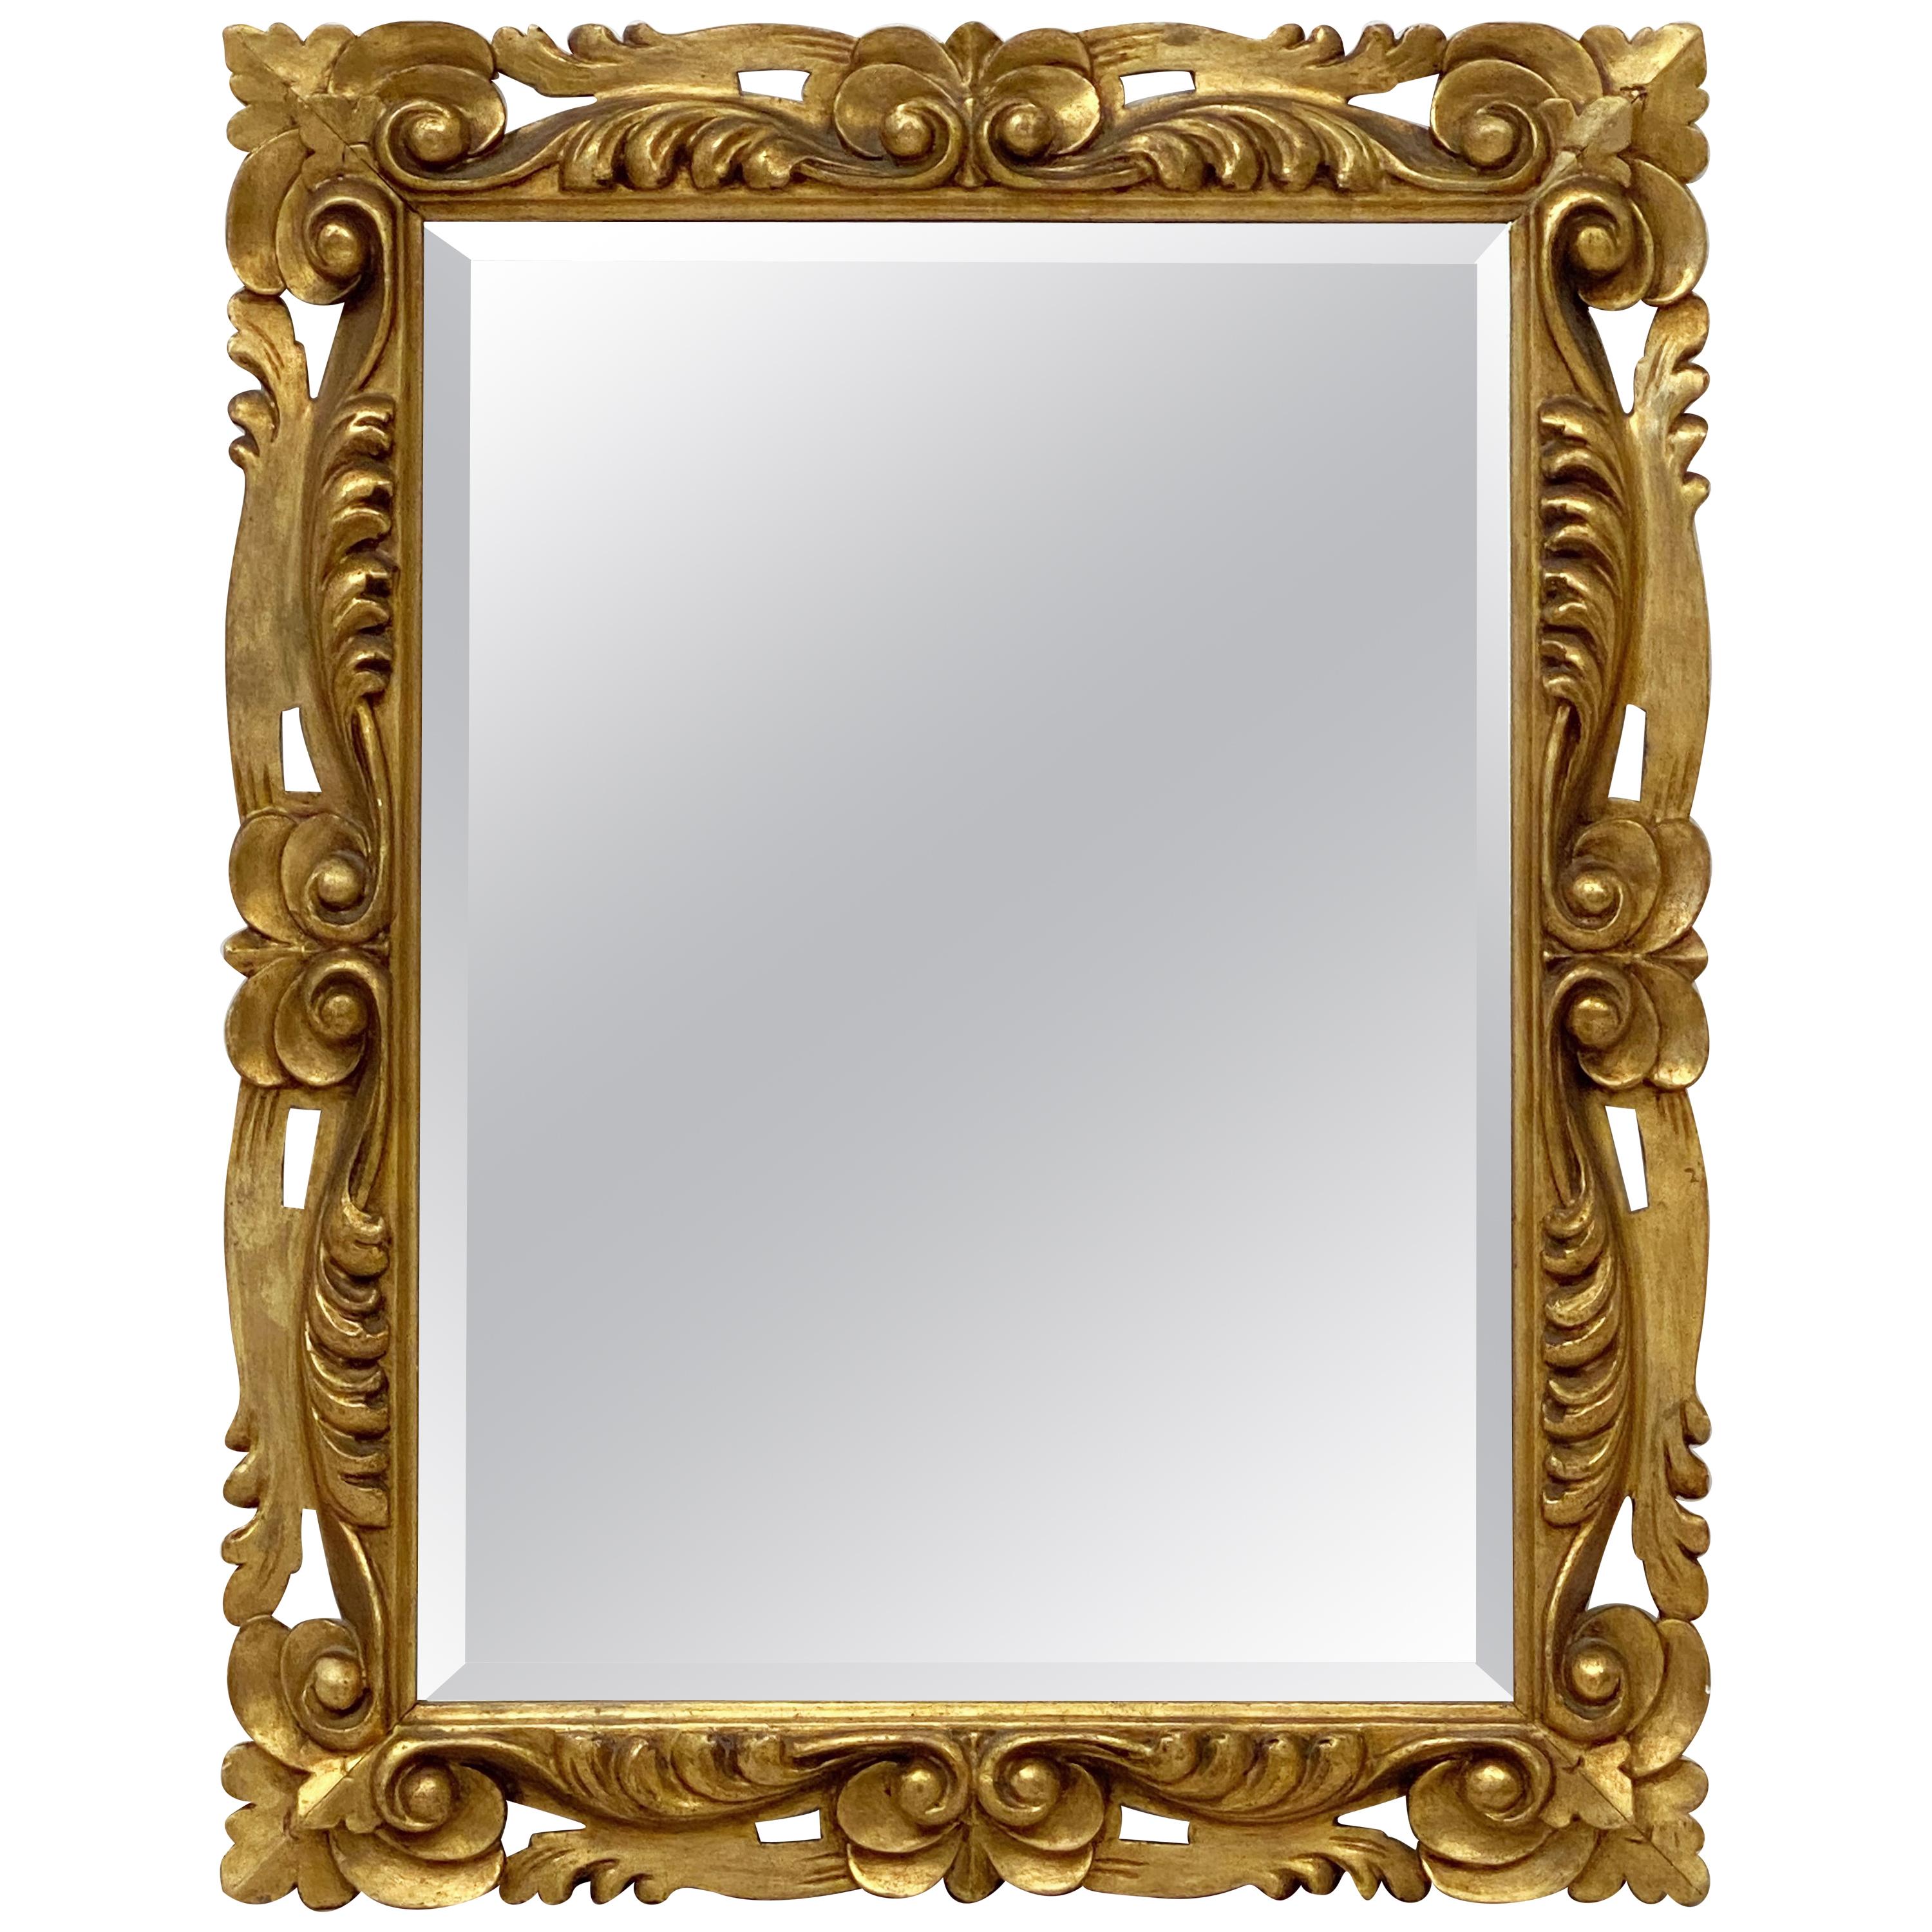 Italian Rococo Rectangular Beveled Mirror with Carved Gilt Frame (H 29 x W 23)